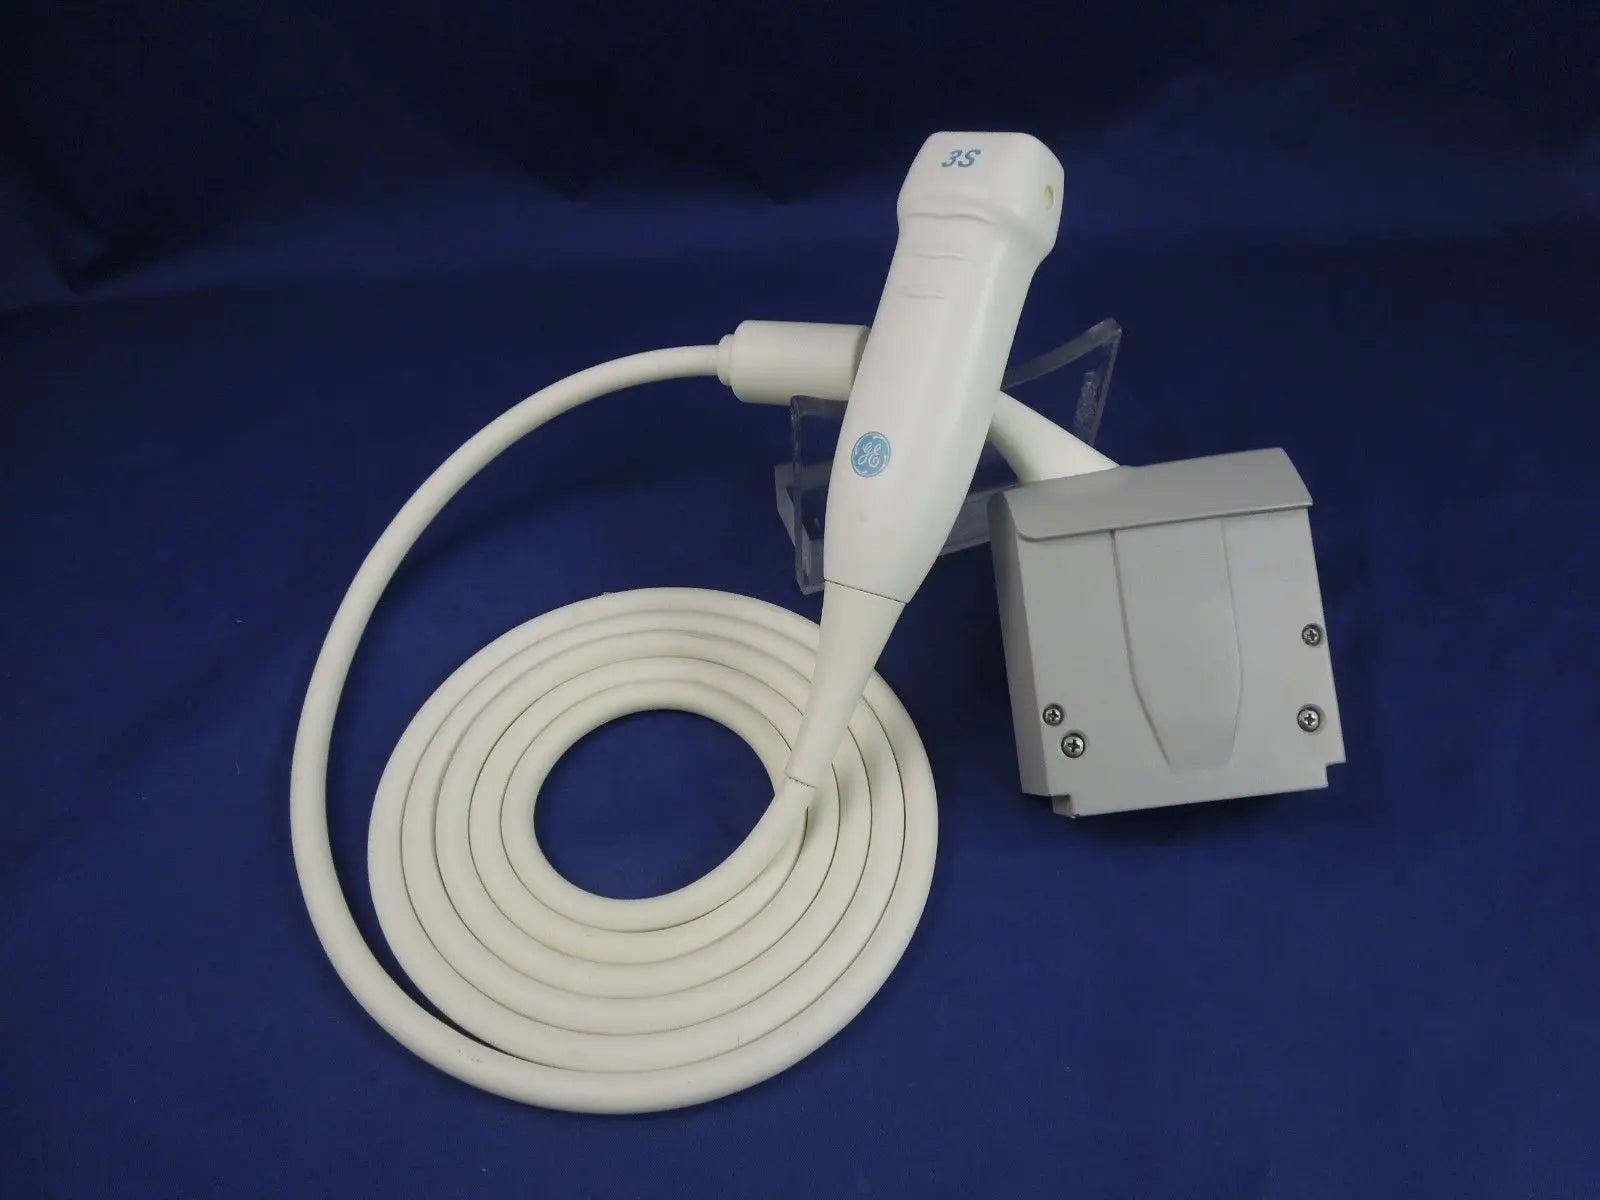 GE 3S-S Ultrasound Transducer DIAGNOSTIC ULTRASOUND MACHINES FOR SALE